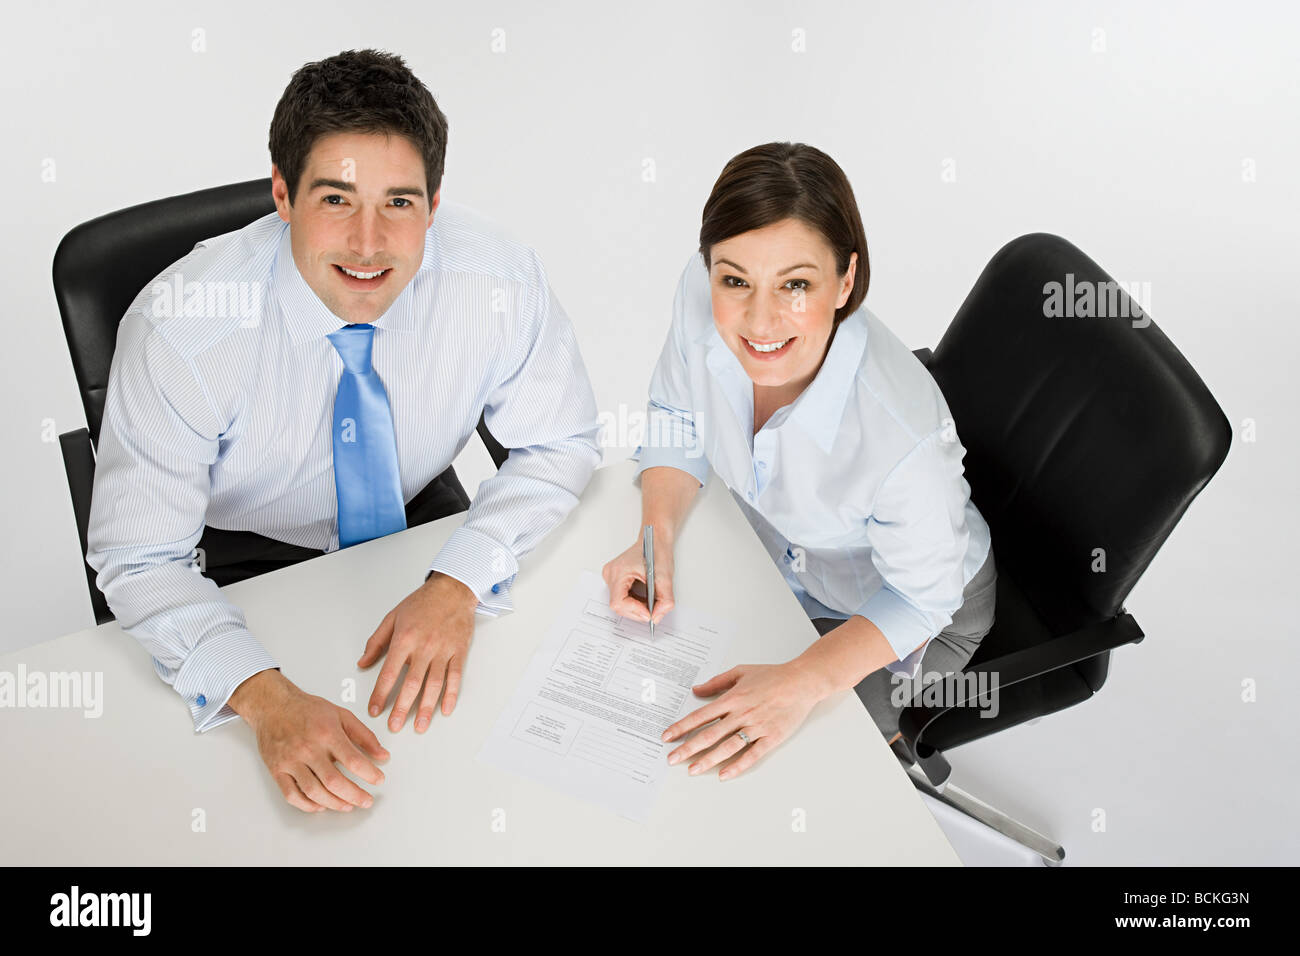 Colleagues Stock Photo